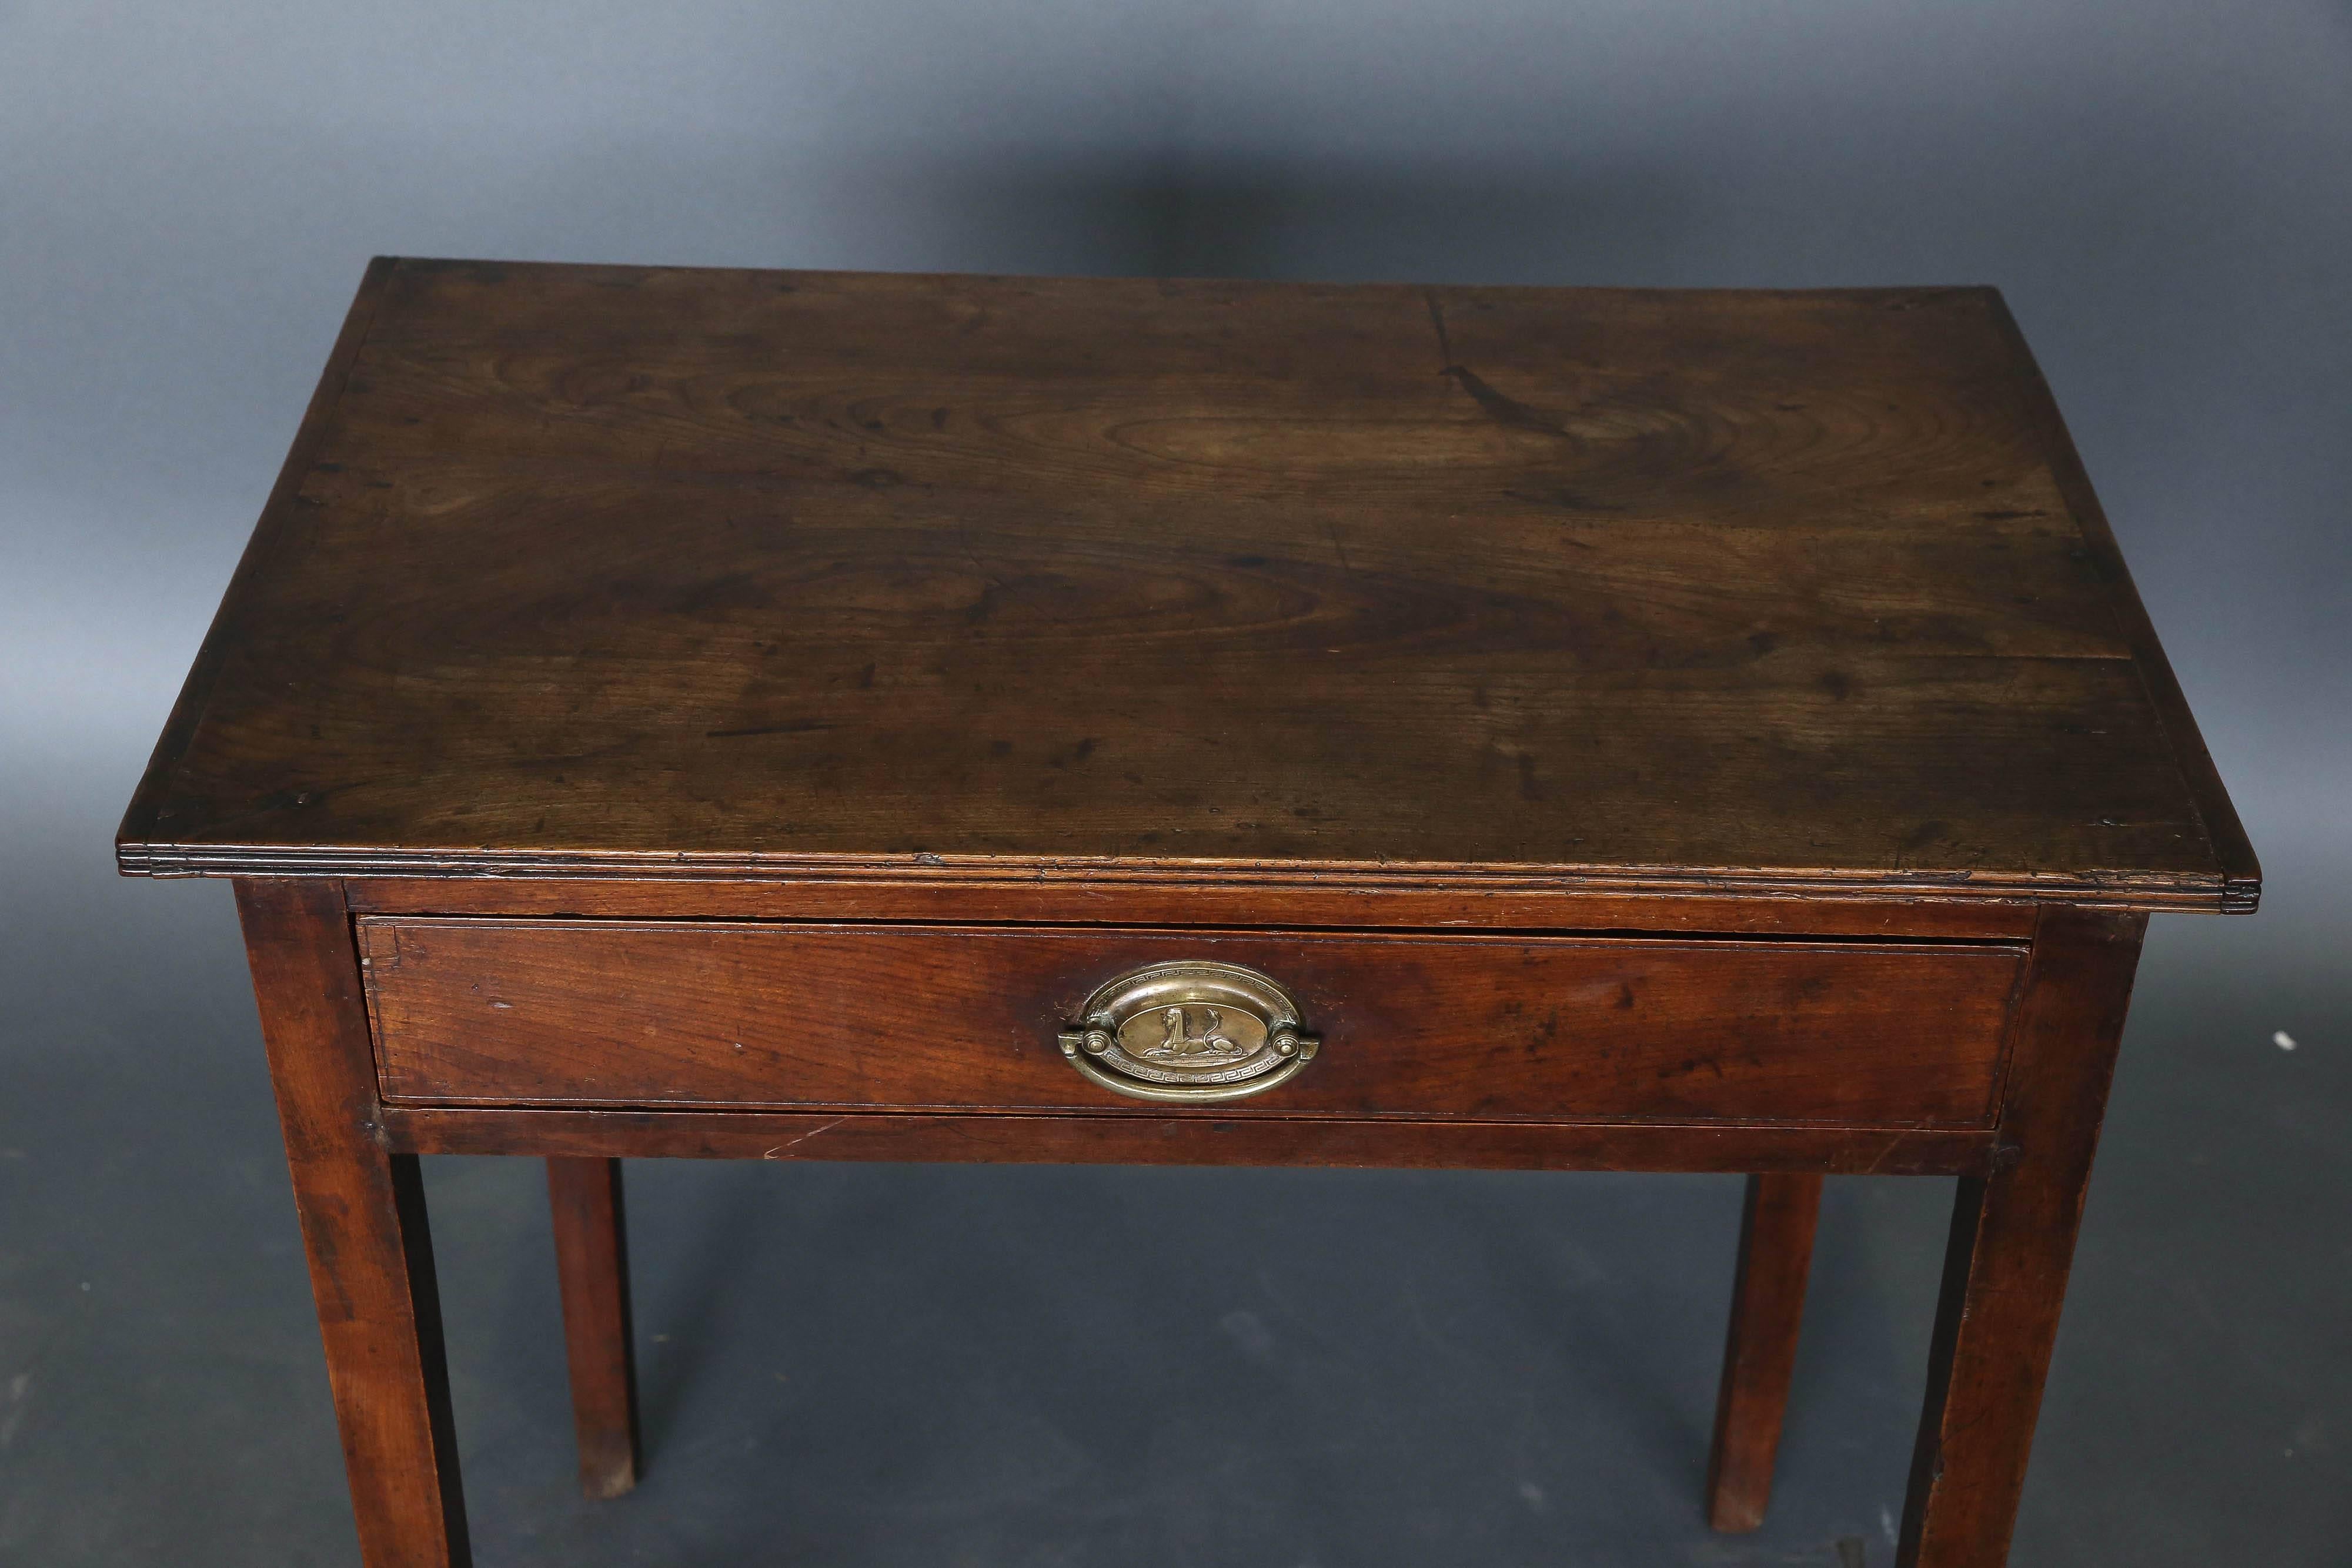 19th century mahogany table with original Sphinx hardware and a single drawer on slightly tapered legs.